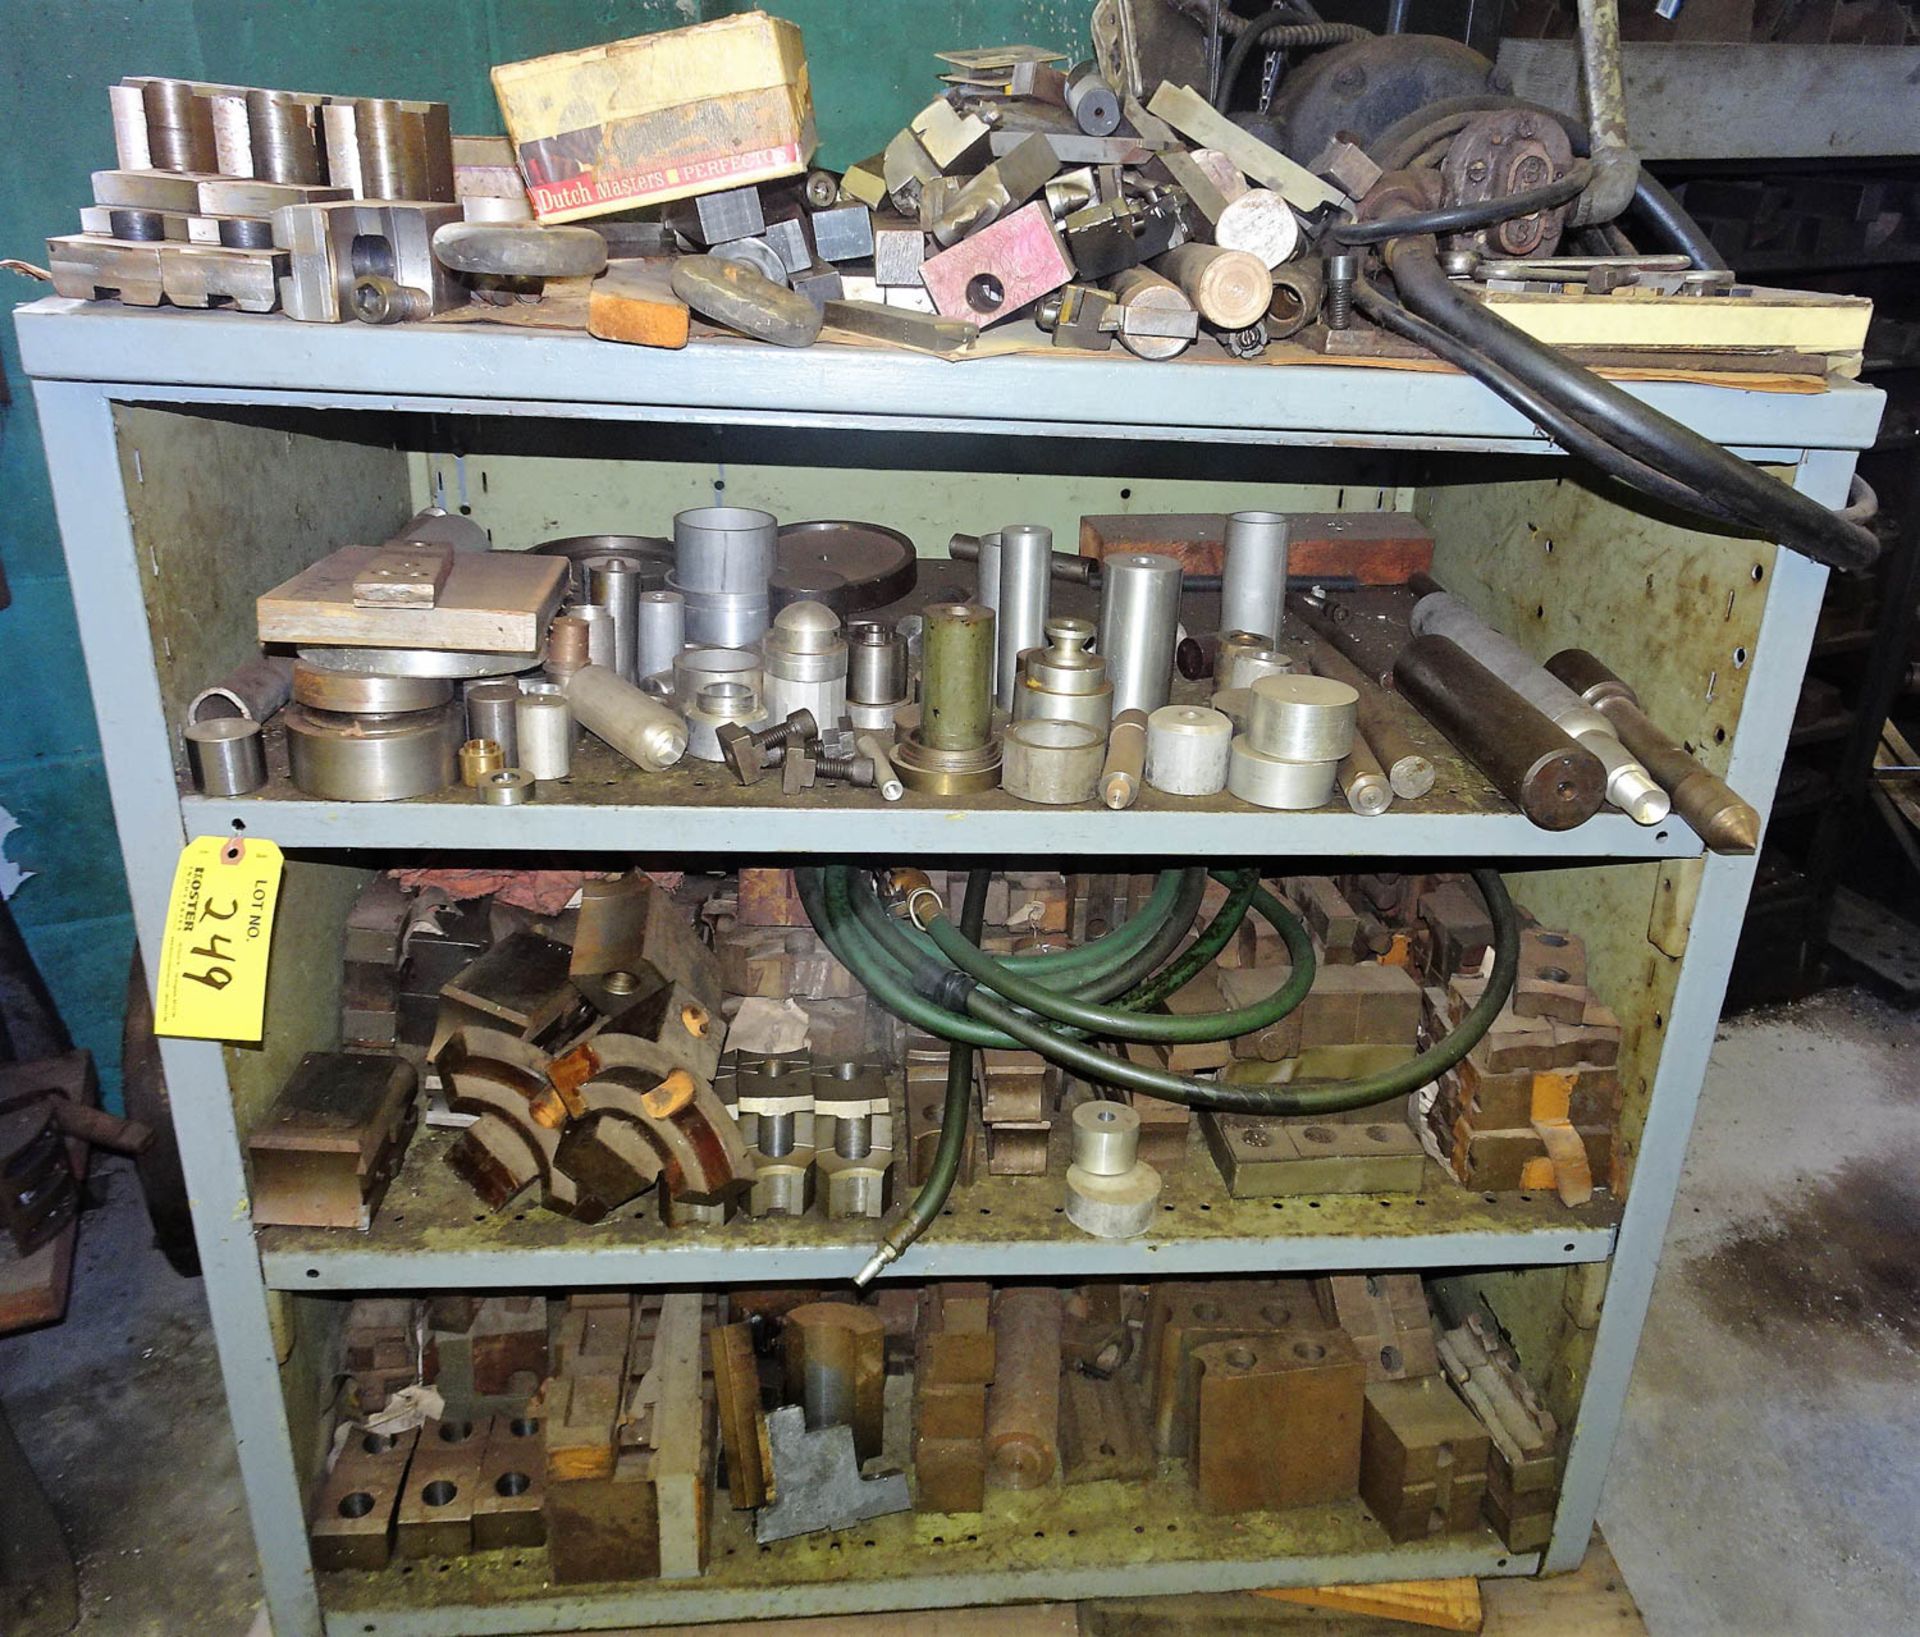 (3) SHELVING UNITS, (1) STEEL LEGGED STEEL TOPPED WORK BENCH WITH CONTENTS, INCLUDING: CHUCK JAWS, - Image 4 of 5